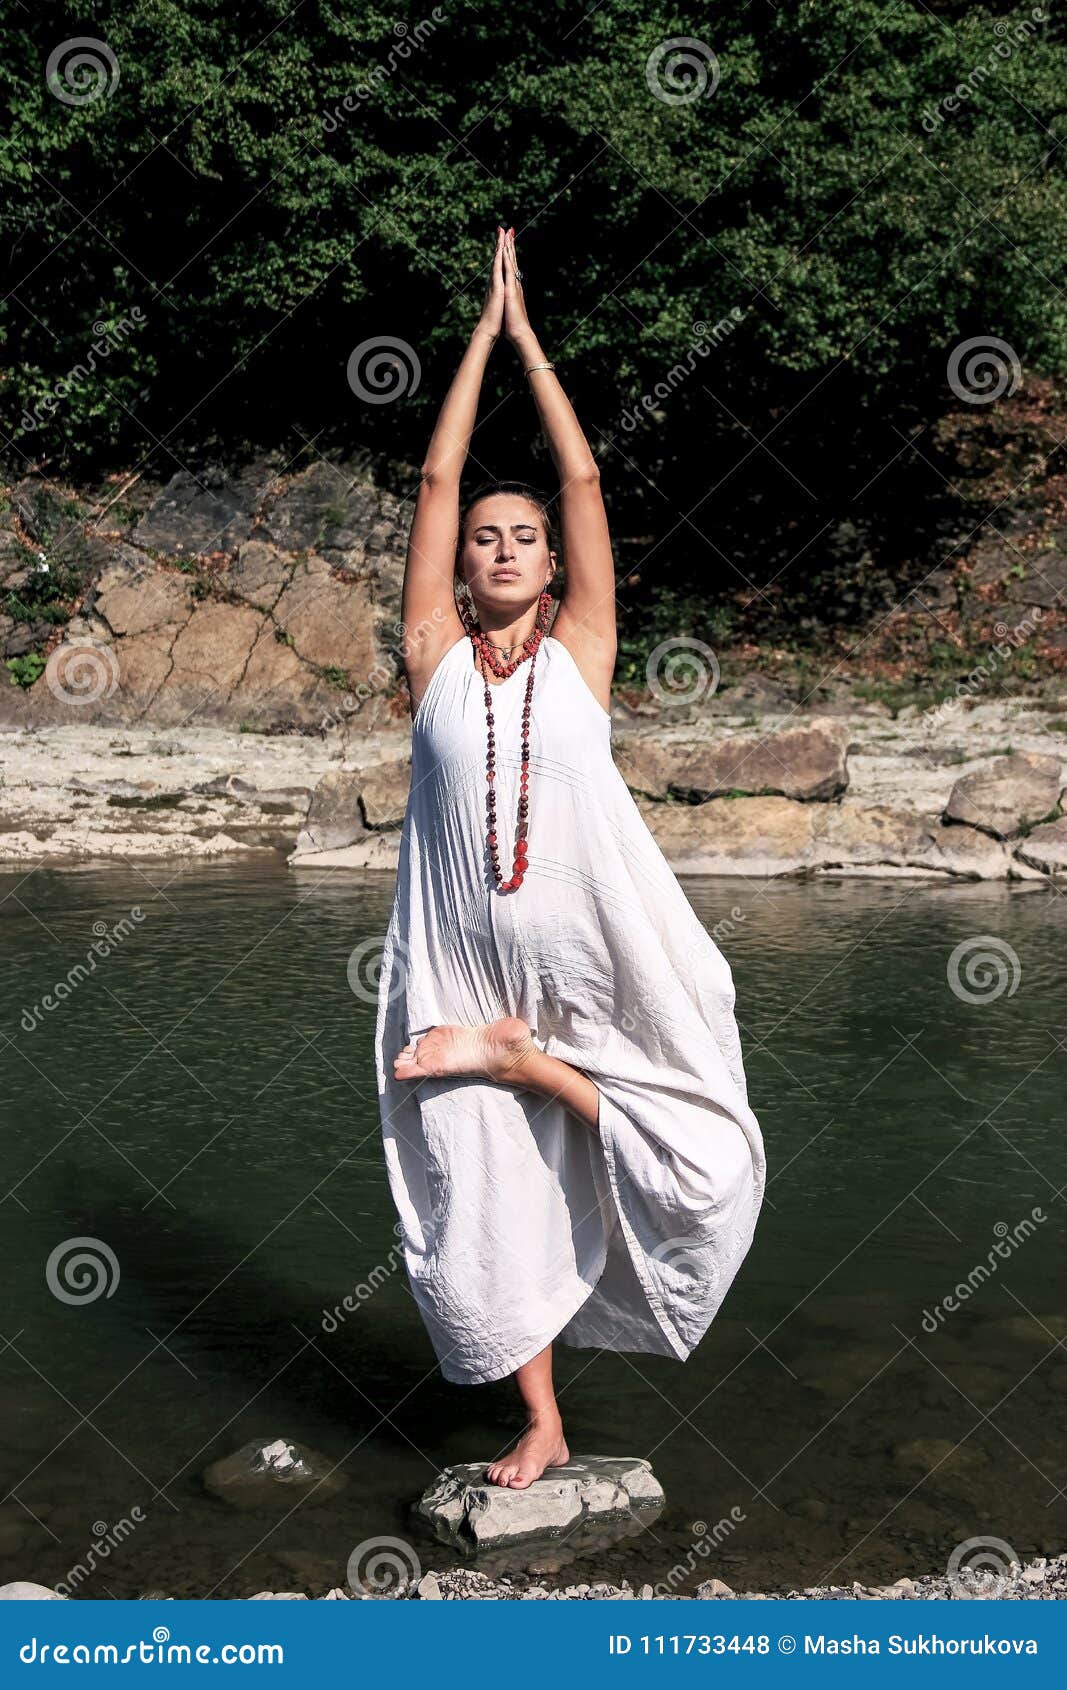 Girl in White Dress is Engaged in Yoga Stock Photo - Image of